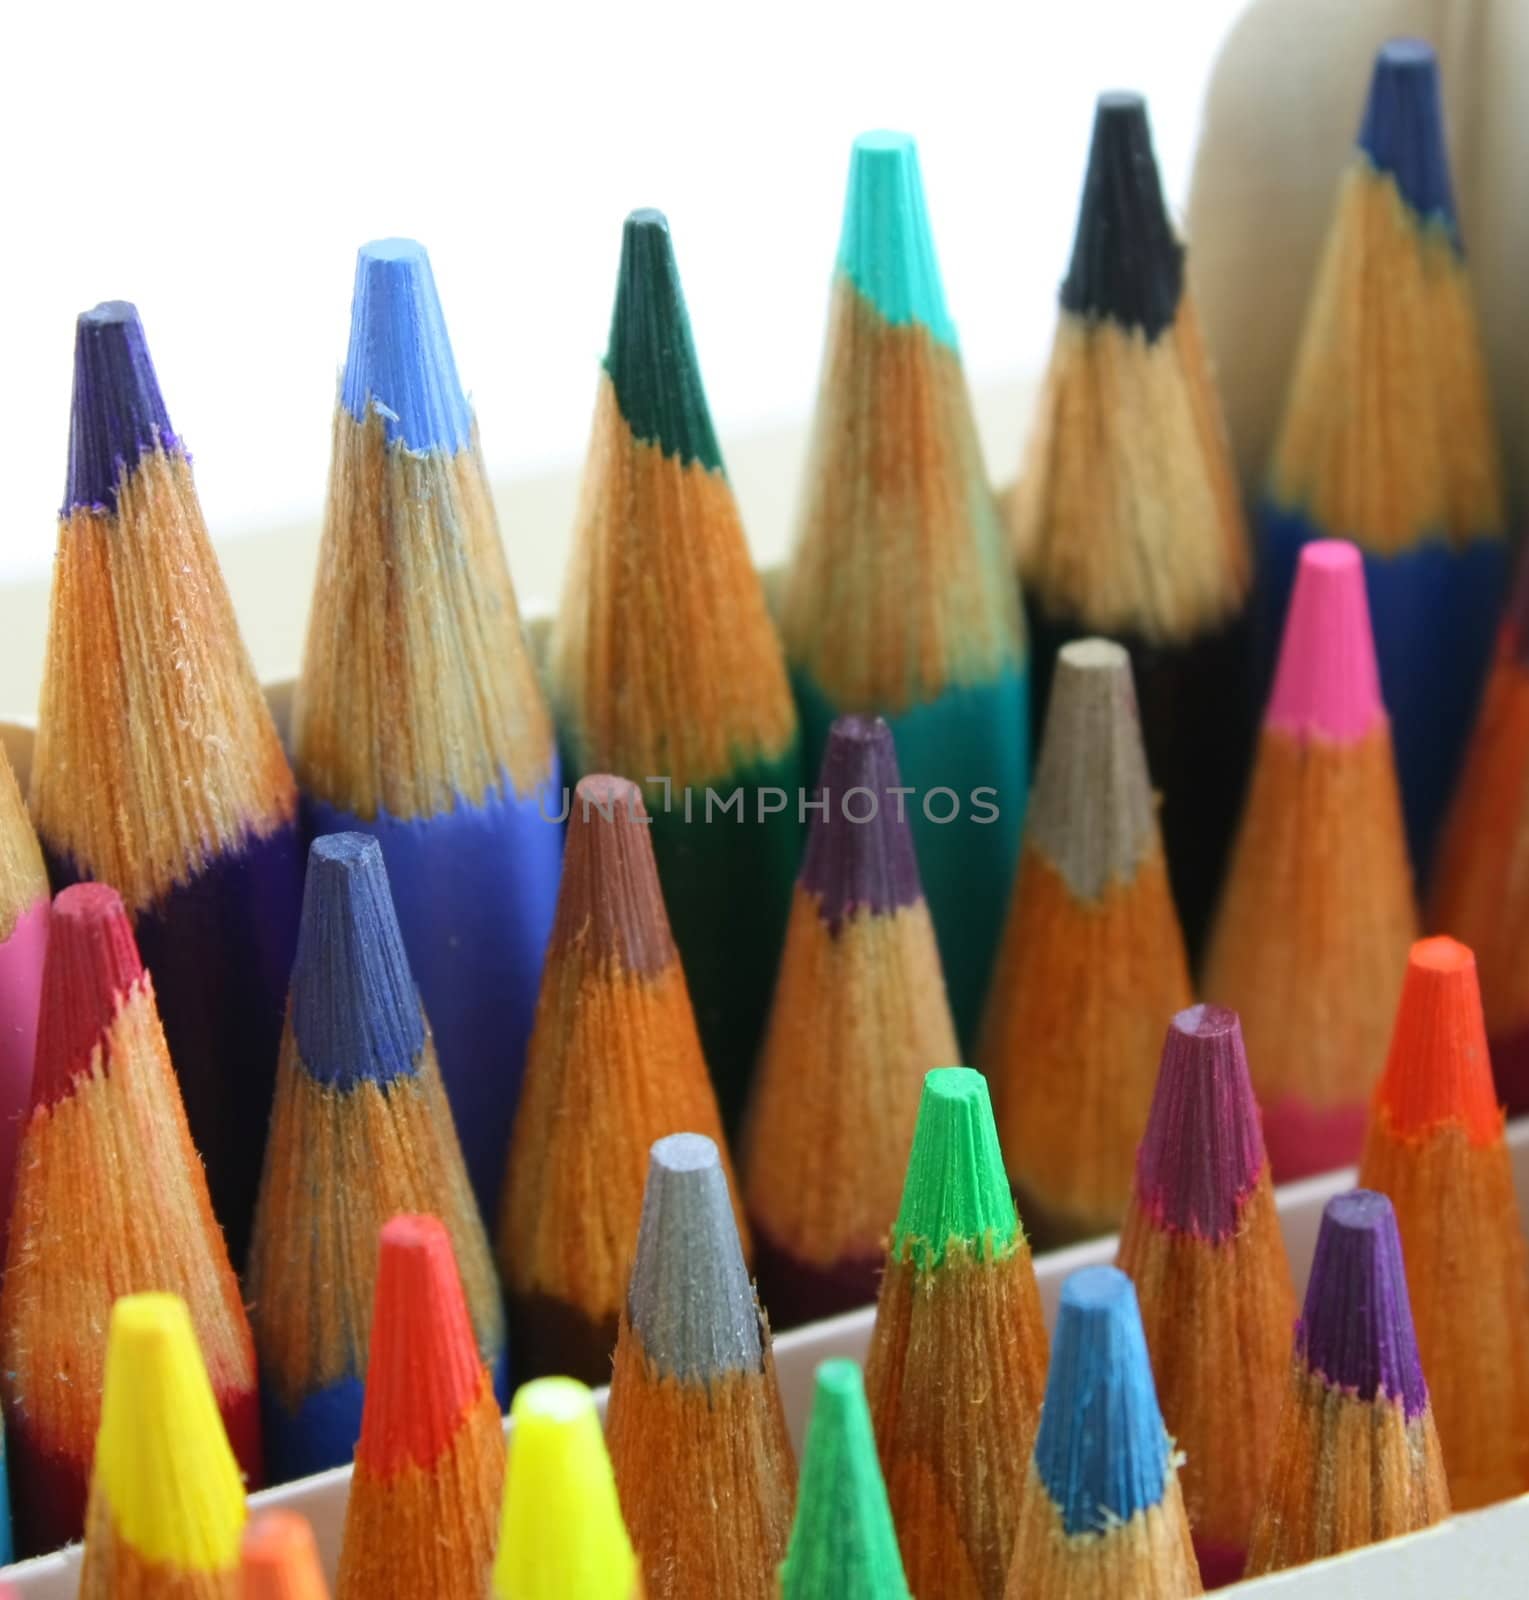 Sharpened Pencil crayons upright pattern, rainbow of colors